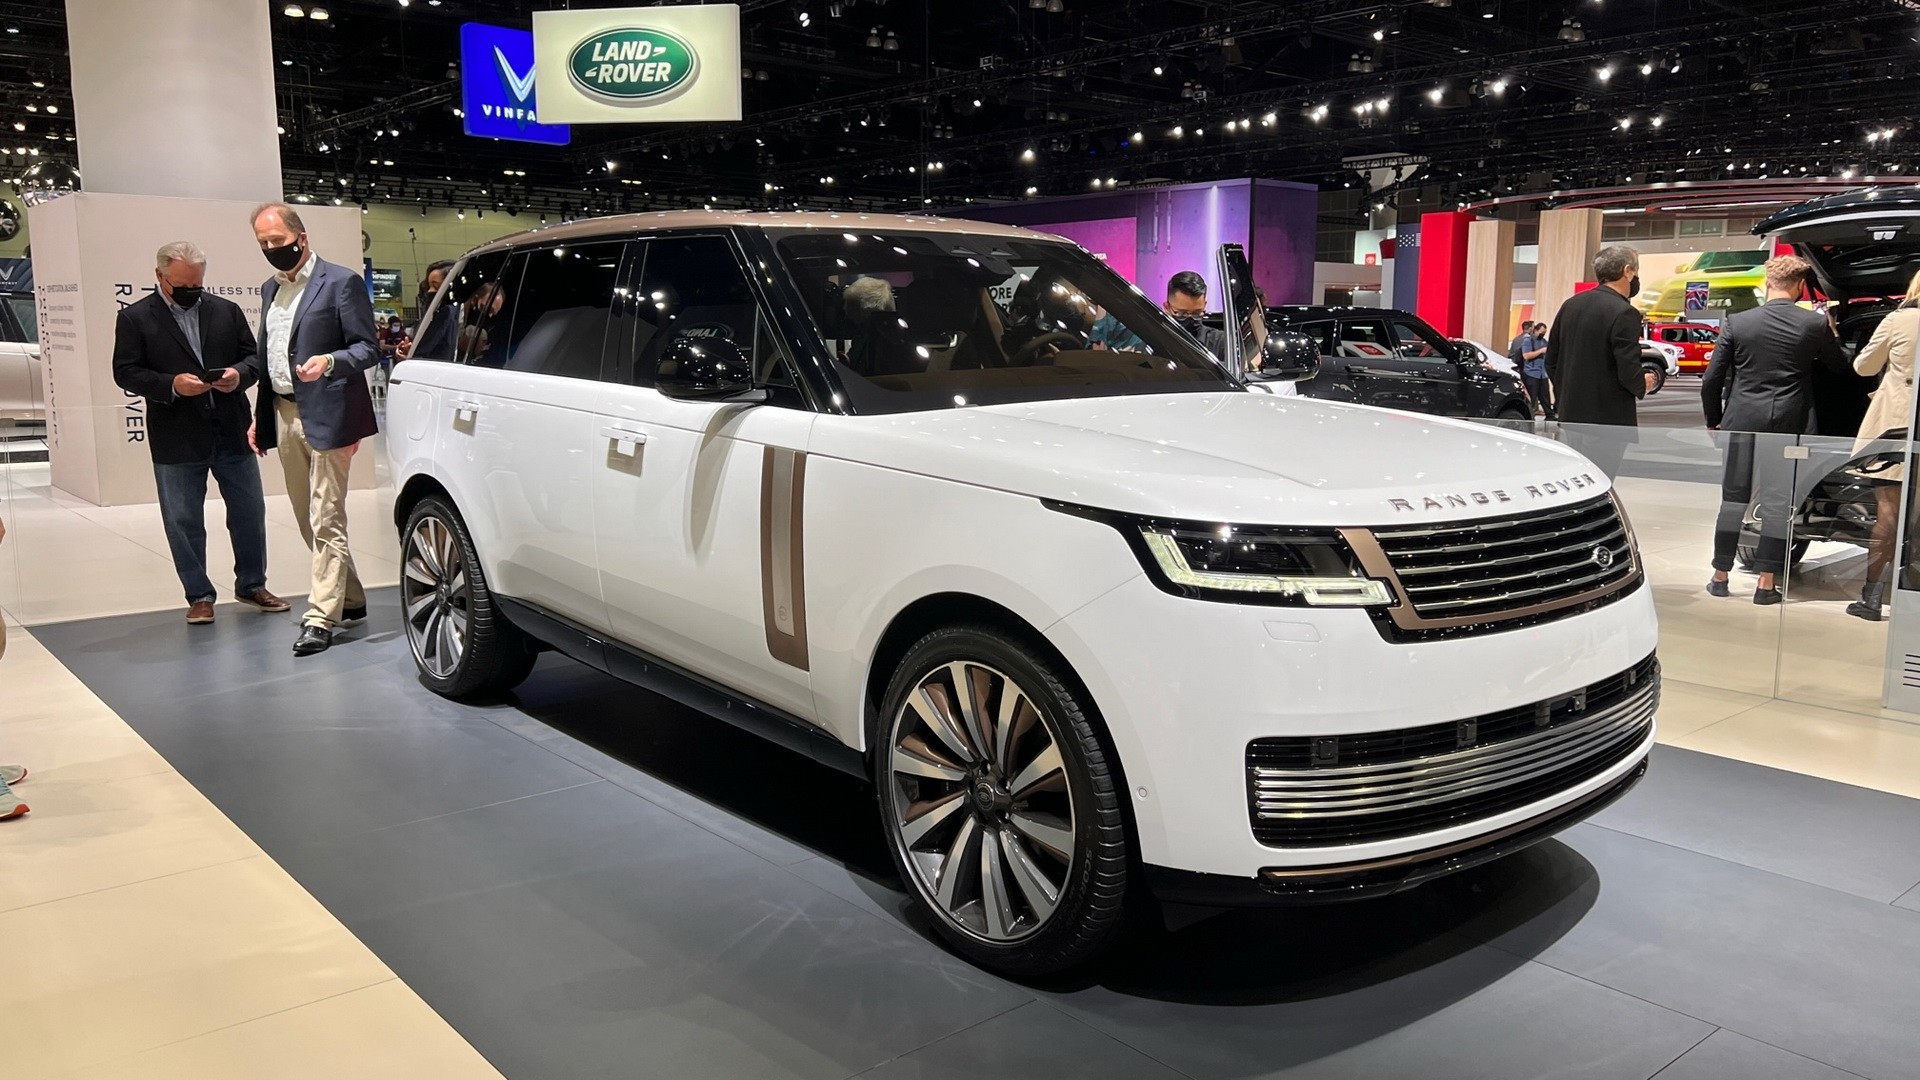 all-new-2022-range-rover-visits-la-auto-show-to-entice-its-target-audience-1.jpg